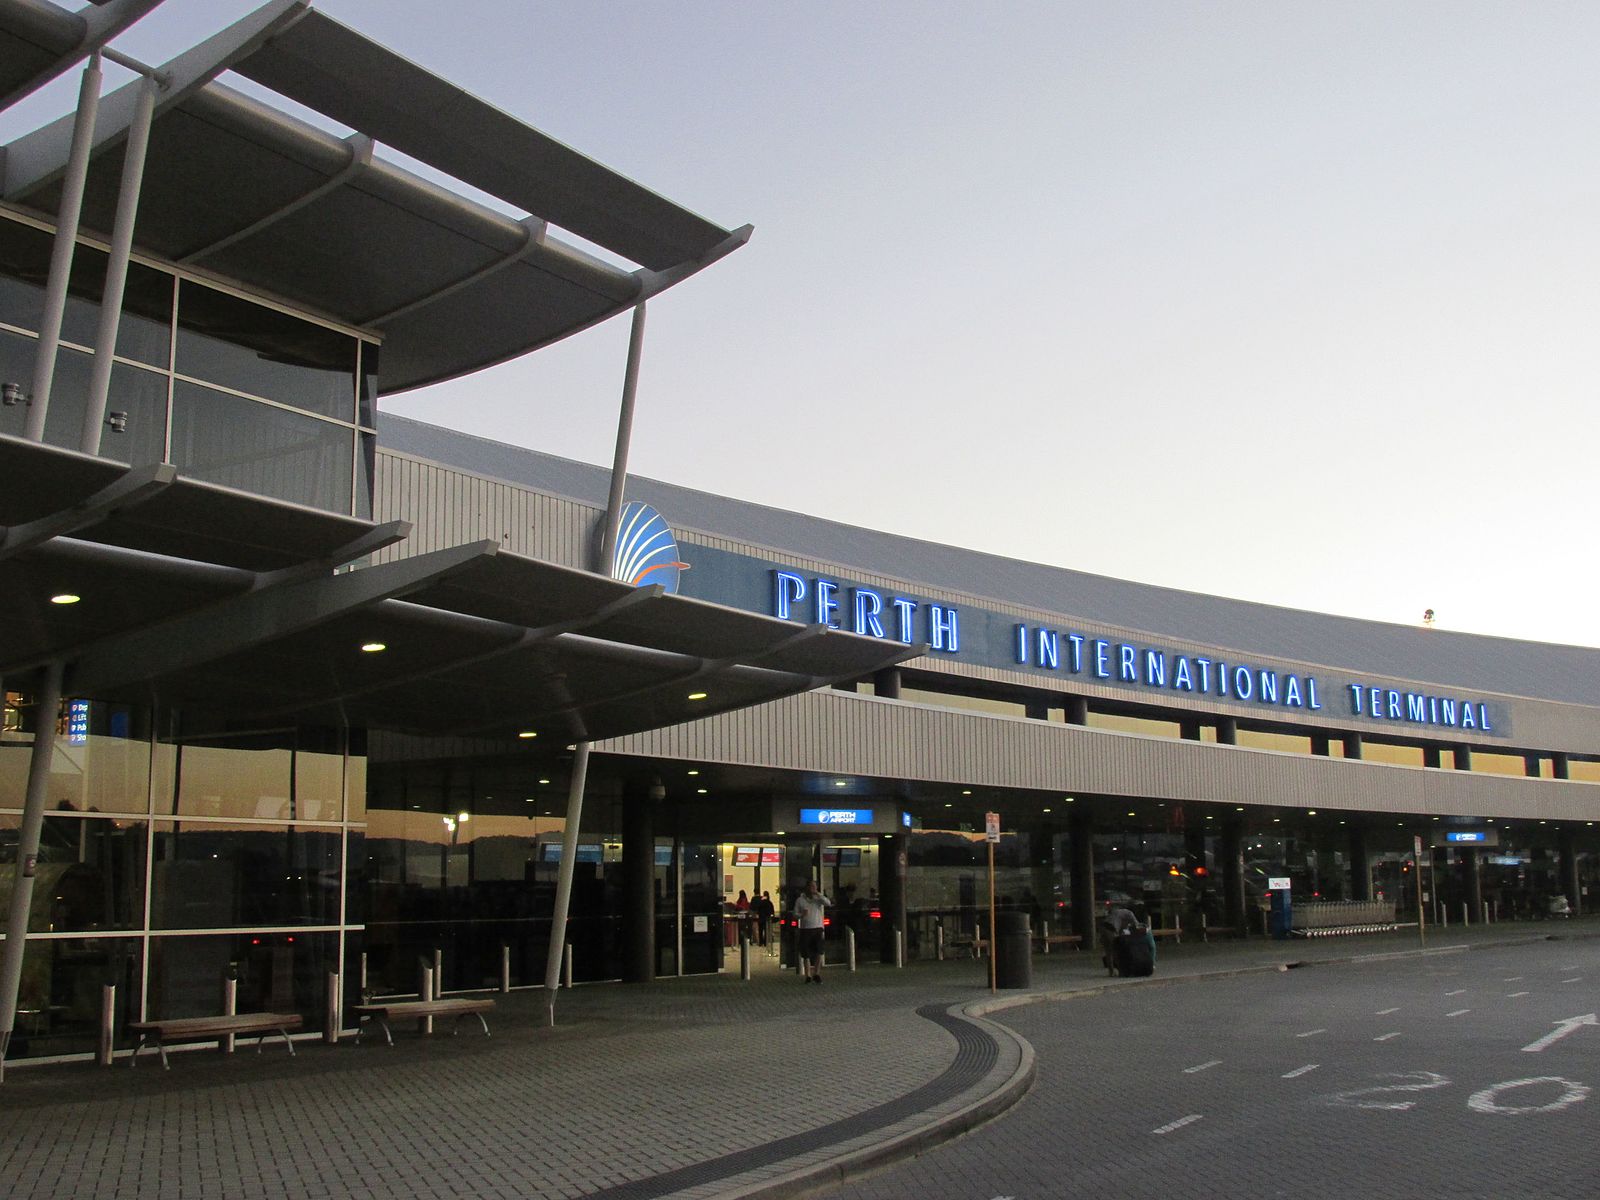 Perth Airport serves the city of Perth in Western Australia.